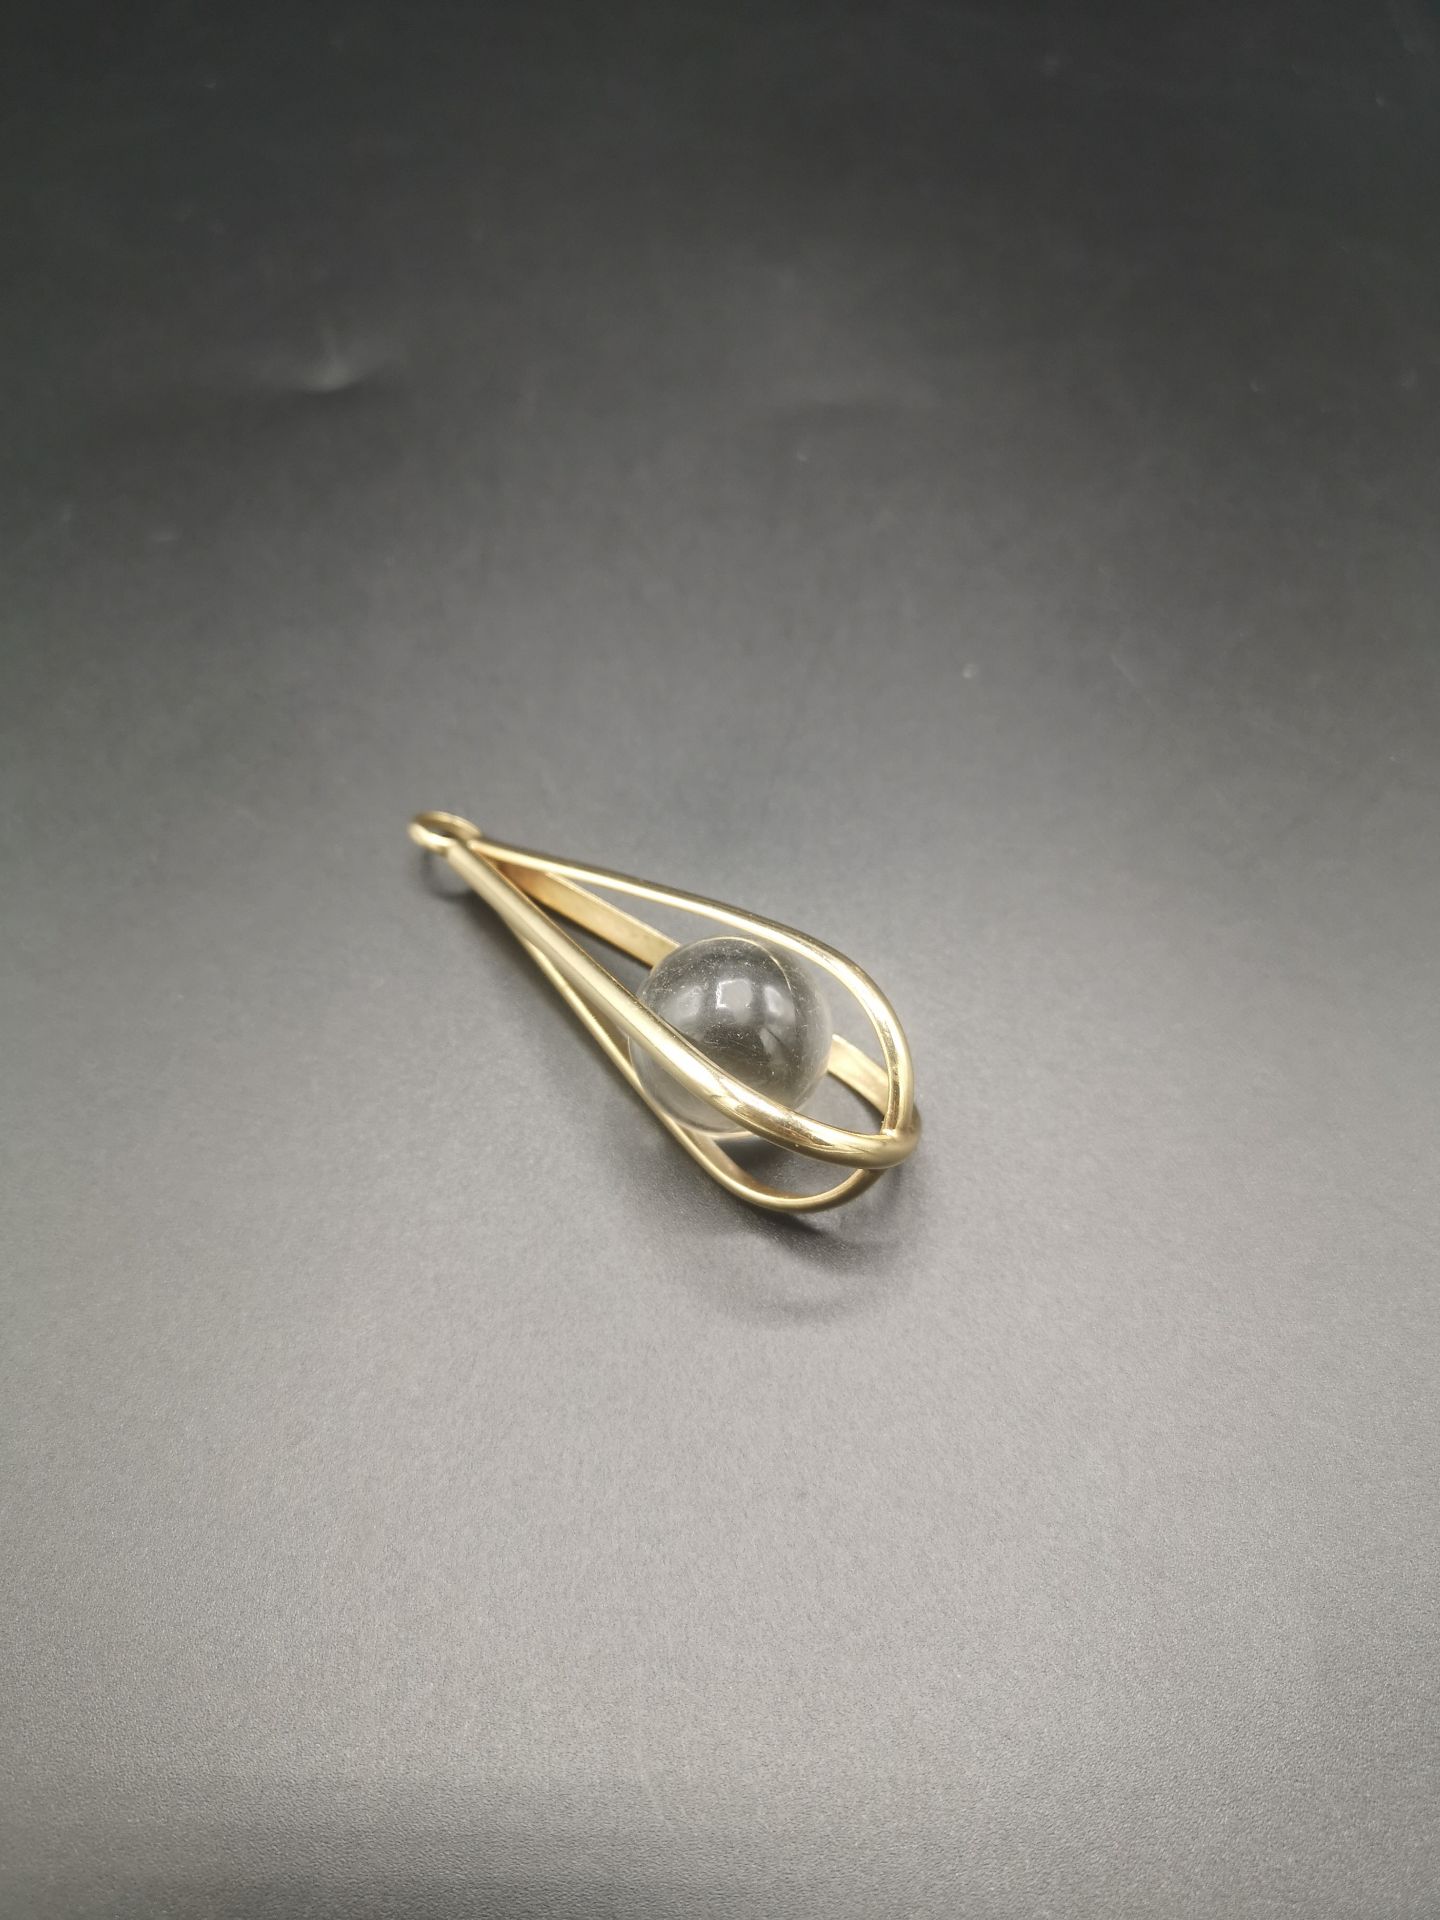 9ct gold pendant - Image 2 of 5